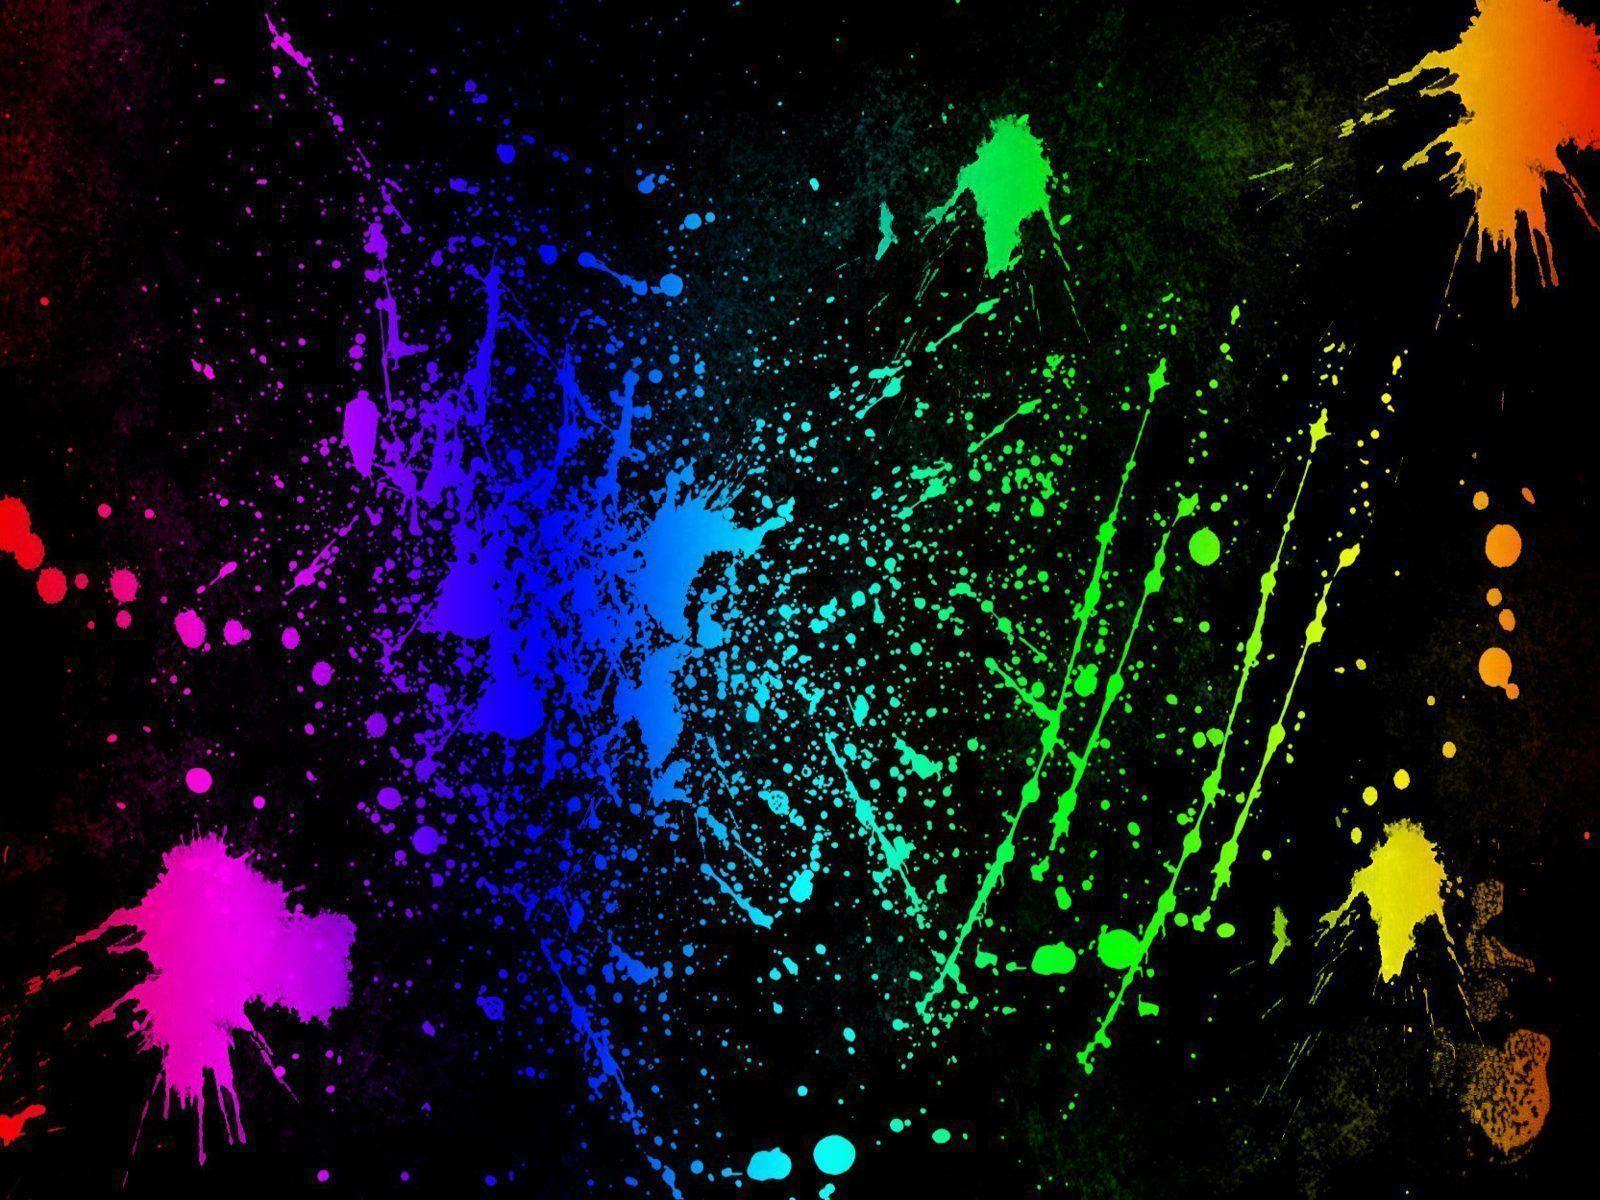 Neon Colors Rock image Splatter HD wallpaper and background photo